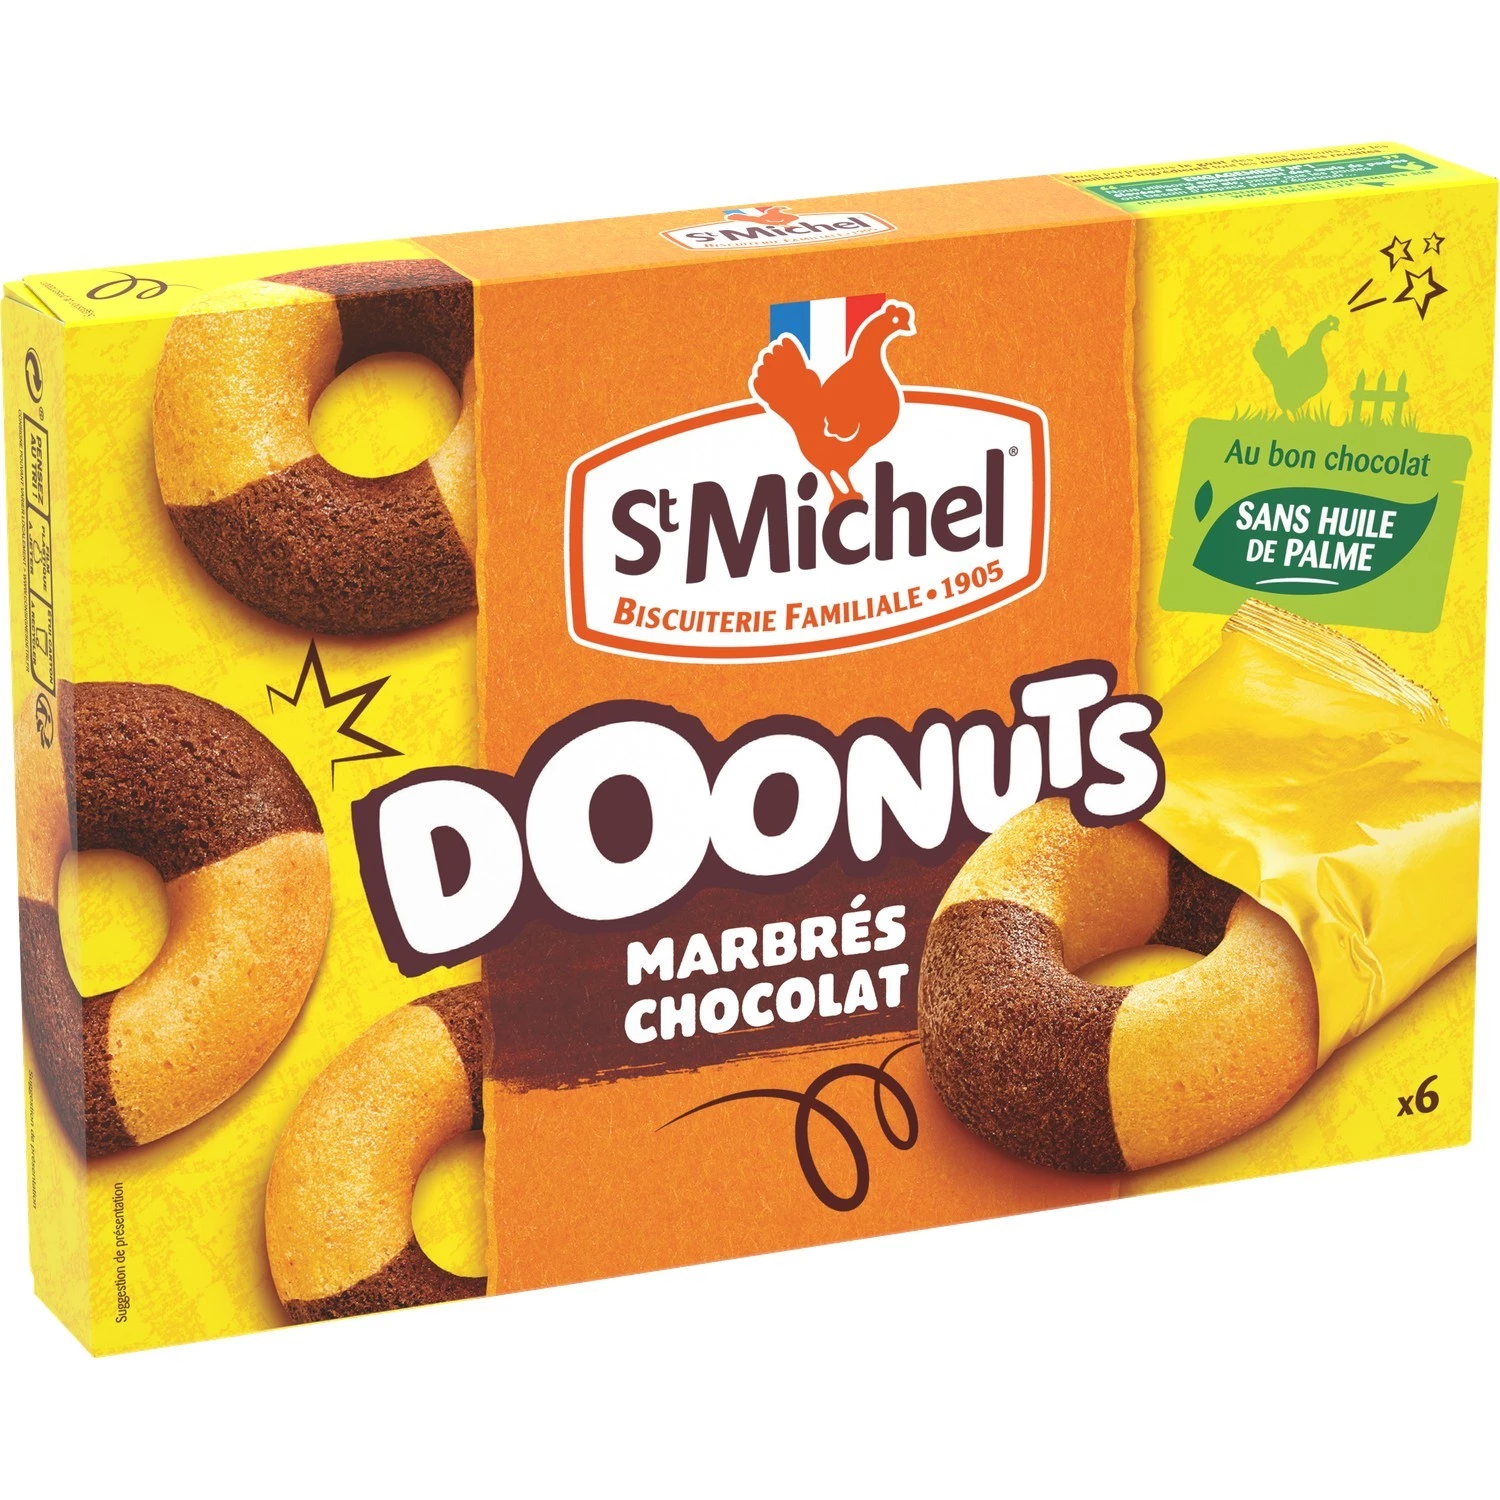 Chocolate Marbled Chocolate Doonuts Cakes 180g - ST MICHEL